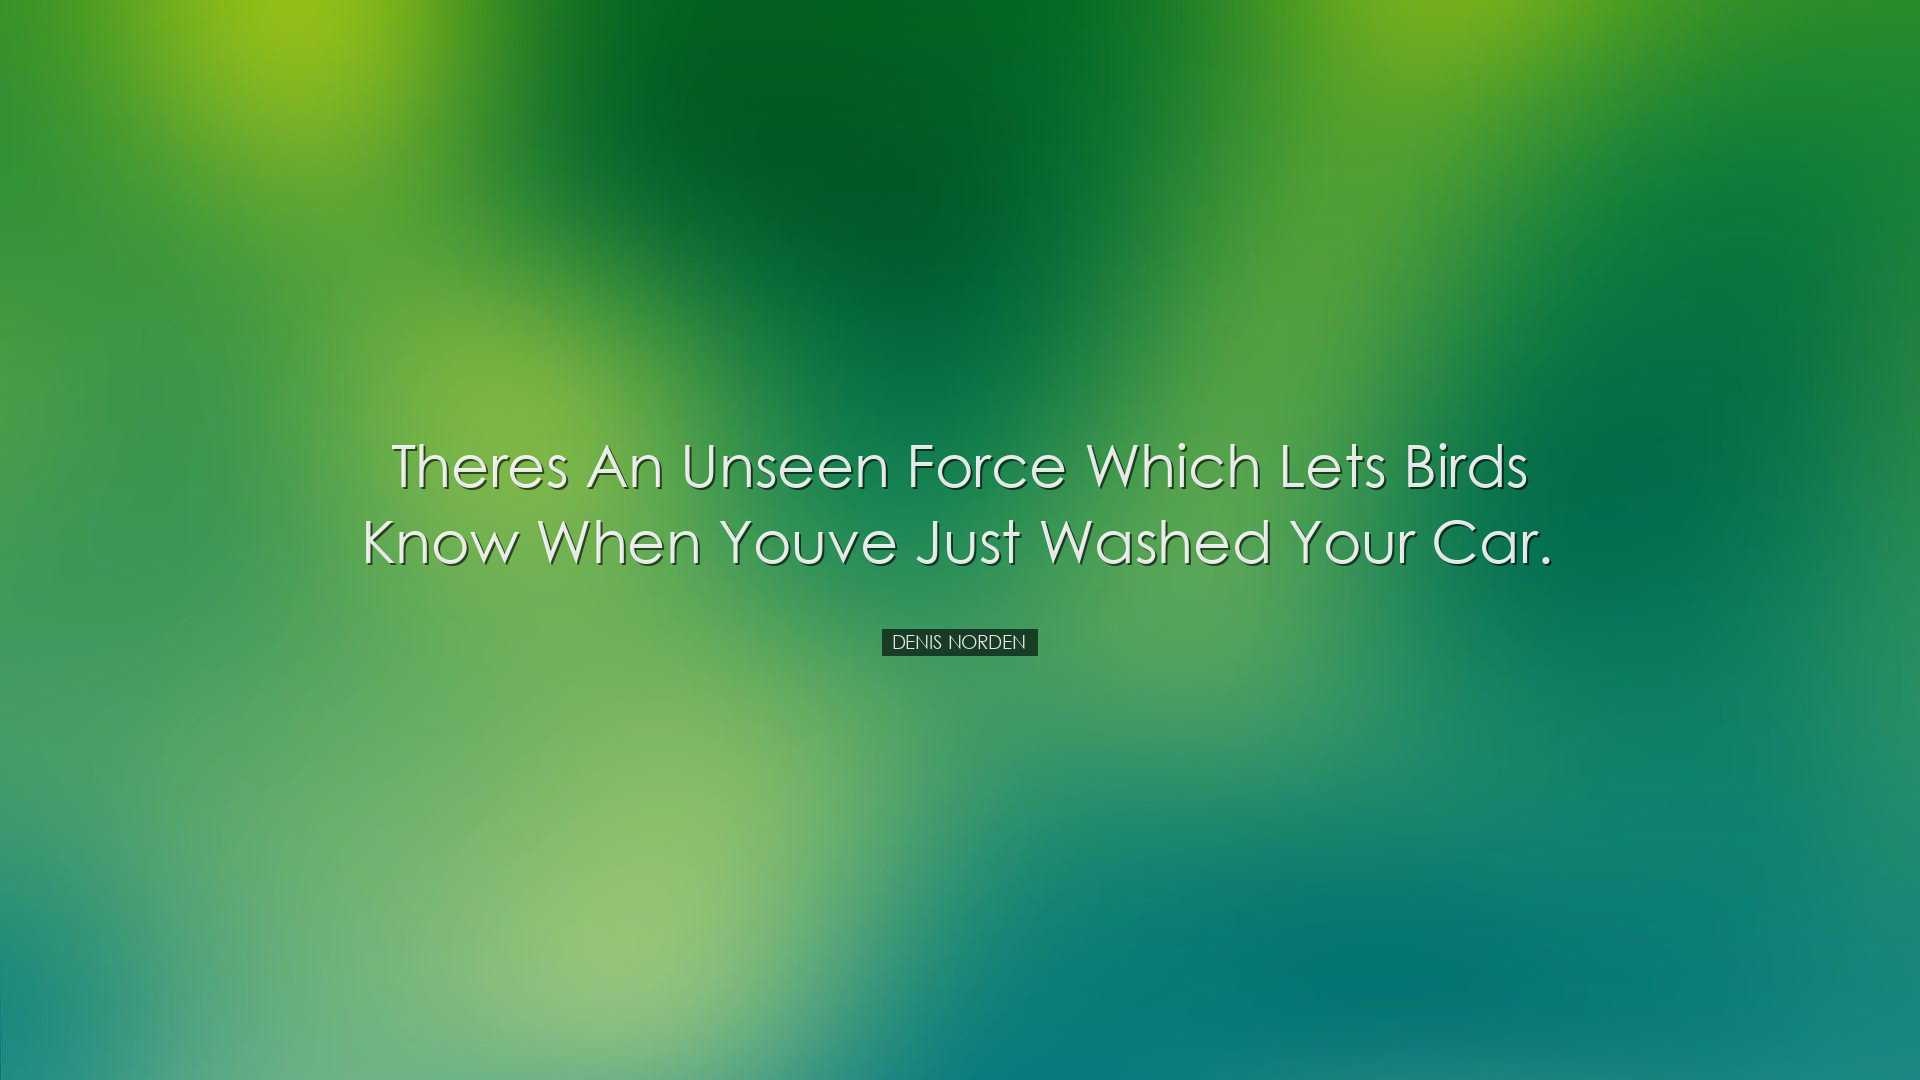 Theres an unseen force which lets birds know when youve just washe